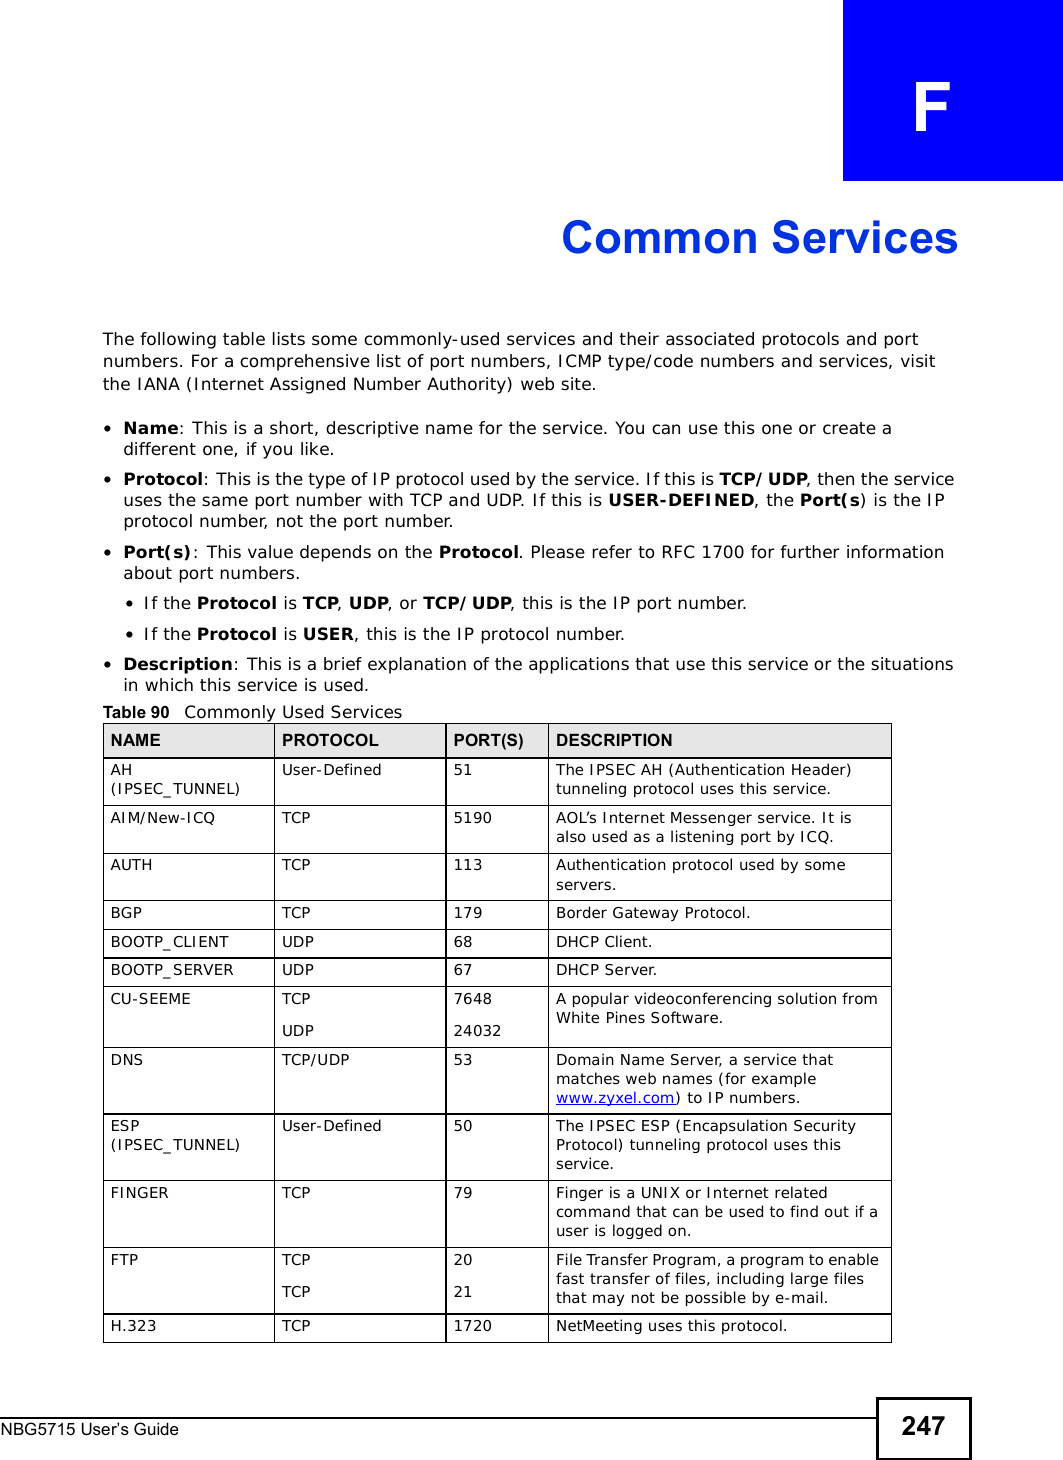 NBG5715 User’s Guide 247APPENDIX   FCommon ServicesThe following table lists some commonly-used services and their associated protocols and port numbers. For a comprehensive list of port numbers, ICMP type/code numbers and services, visit the IANA (Internet Assigned Number Authority) web site. •Name: This is a short, descriptive name for the service. You can use this one or create a different one, if you like.•Protocol: This is the type of IP protocol used by the service. If this is TCP/UDP, then the service uses the same port number with TCP and UDP. If this is USER-DEFINED, the Port(s) is the IP protocol number, not the port number.•Port(s): This value depends on the Protocol. Please refer to RFC 1700 for further information about port numbers.•If the Protocol is TCP,UDP, or TCP/UDP, this is the IP port number.•If the Protocol is USER, this is the IP protocol number.•Description: This is a brief explanation of the applications that use this service or the situations in which this service is used.Table 90   Commonly Used ServicesNAME PROTOCOL PORT(S) DESCRIPTIONAH (IPSEC_TUNNEL) User-Defined 51 The IPSEC AH (Authentication Header) tunneling protocol uses this service.AIM/New-ICQ TCP 5190 AOL’s Internet Messenger service. It is also used as a listening port by ICQ.AUTH TCP 113 Authentication protocol used by some servers.BGP TCP 179 Border Gateway Protocol.BOOTP_CLIENT UDP 68 DHCP Client.BOOTP_SERVER UDP 67 DHCP Server.CU-SEEME TCPUDP764824032A popular videoconferencing solution from White Pines Software.DNS TCP/UDP 53 Domain Name Server, a service that matches web names (for example www.zyxel.com) to IP numbers.ESP (IPSEC_TUNNEL) User-Defined 50 The IPSEC ESP (Encapsulation Security Protocol) tunneling protocol uses this service.FINGER TCP 79 Finger is a UNIX or Internet related command that can be used to find out if a user is logged on.FTP TCPTCP2021File Transfer Program, a program to enable fast transfer of files, including large files that may not be possible by e-mail.H.323 TCP 1720 NetMeeting uses this protocol.